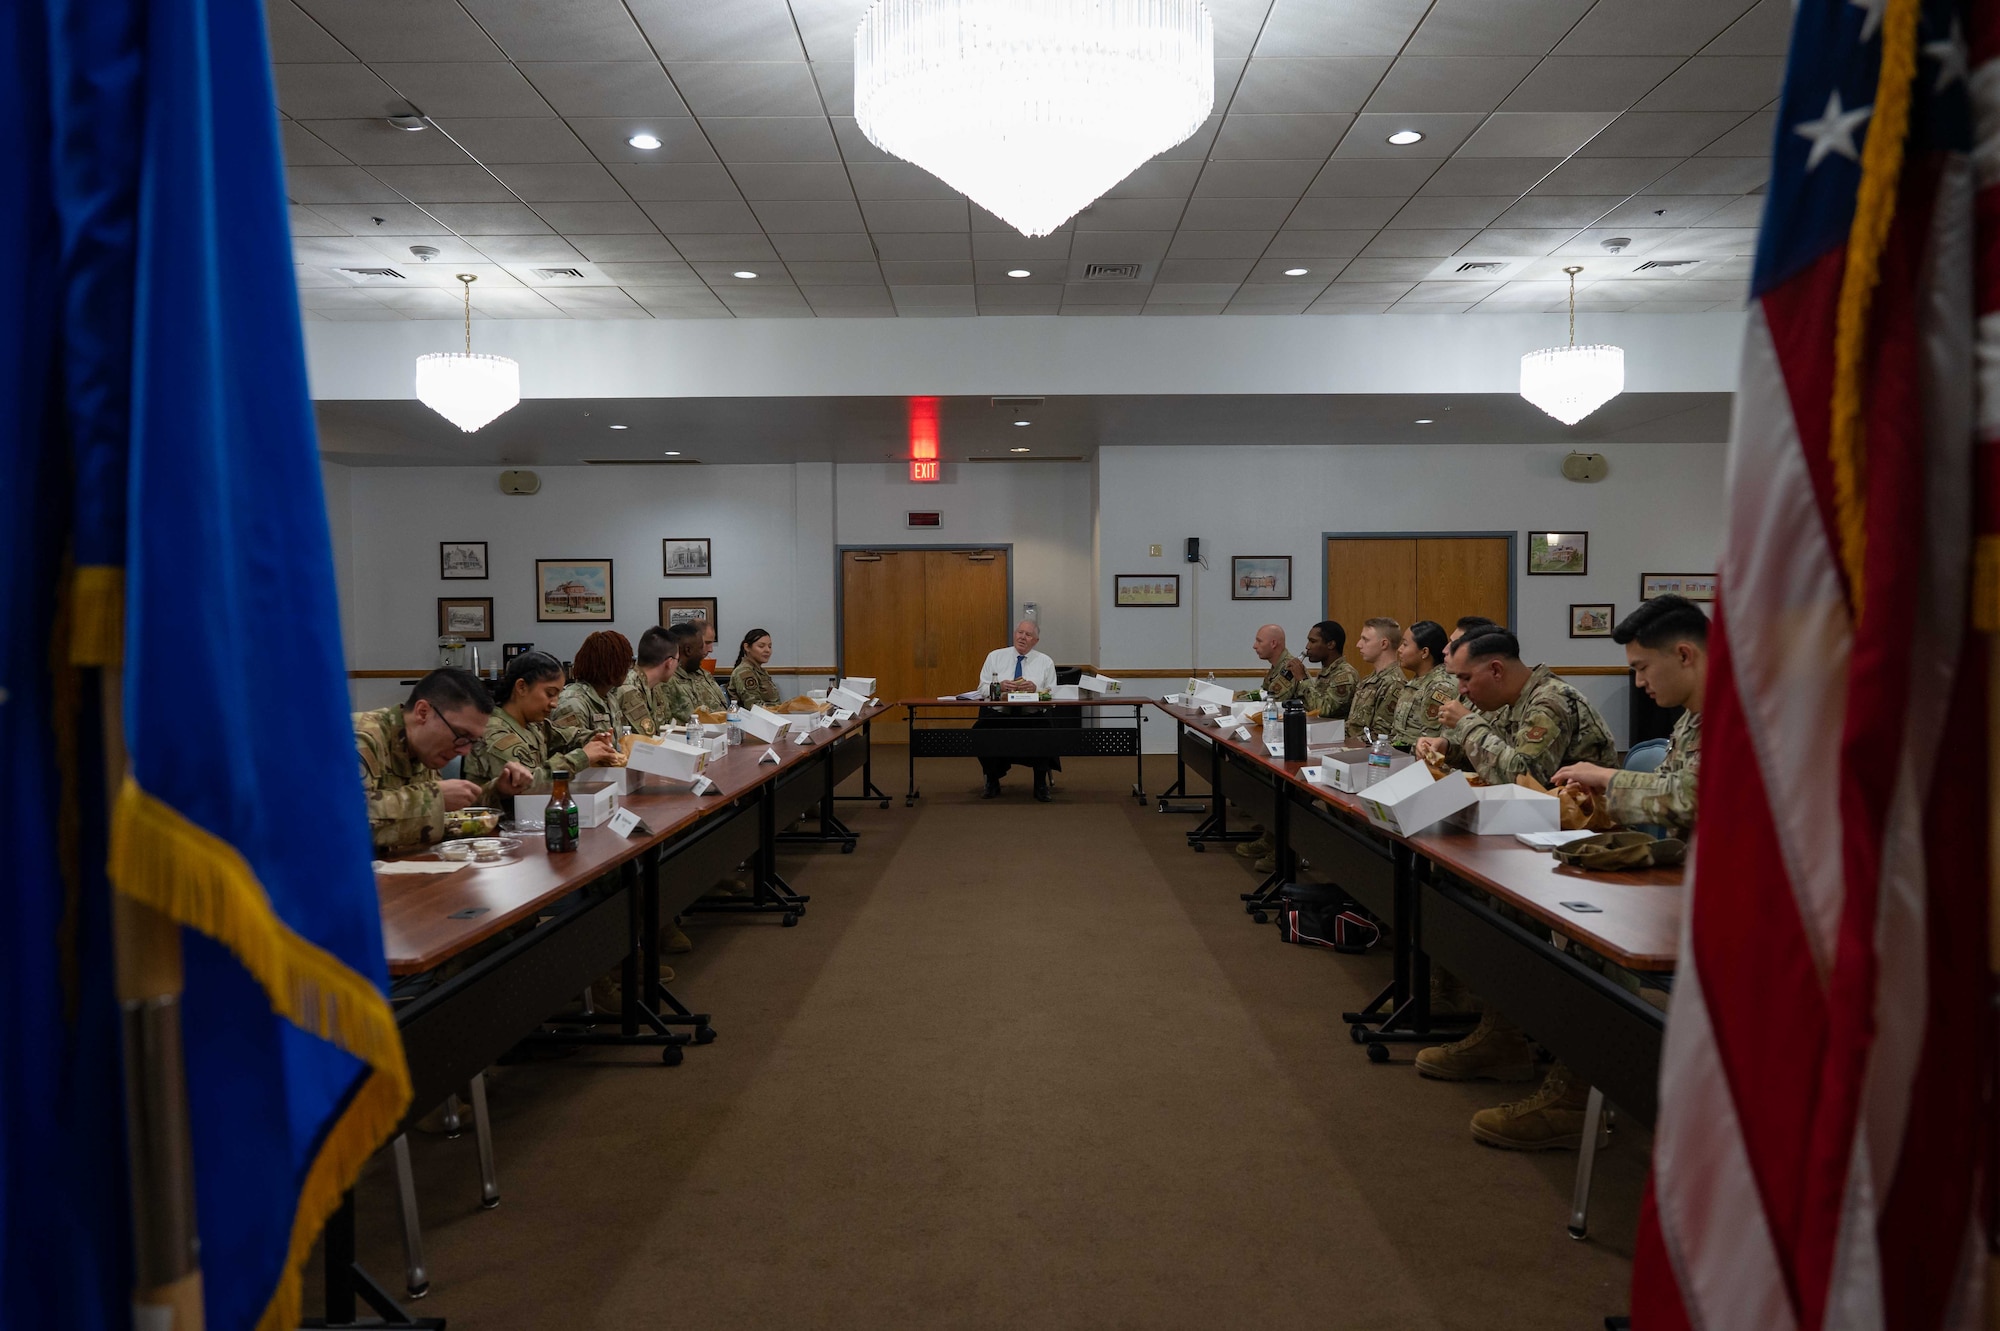 Secretary of the Air Force having a table discussion with Airmen